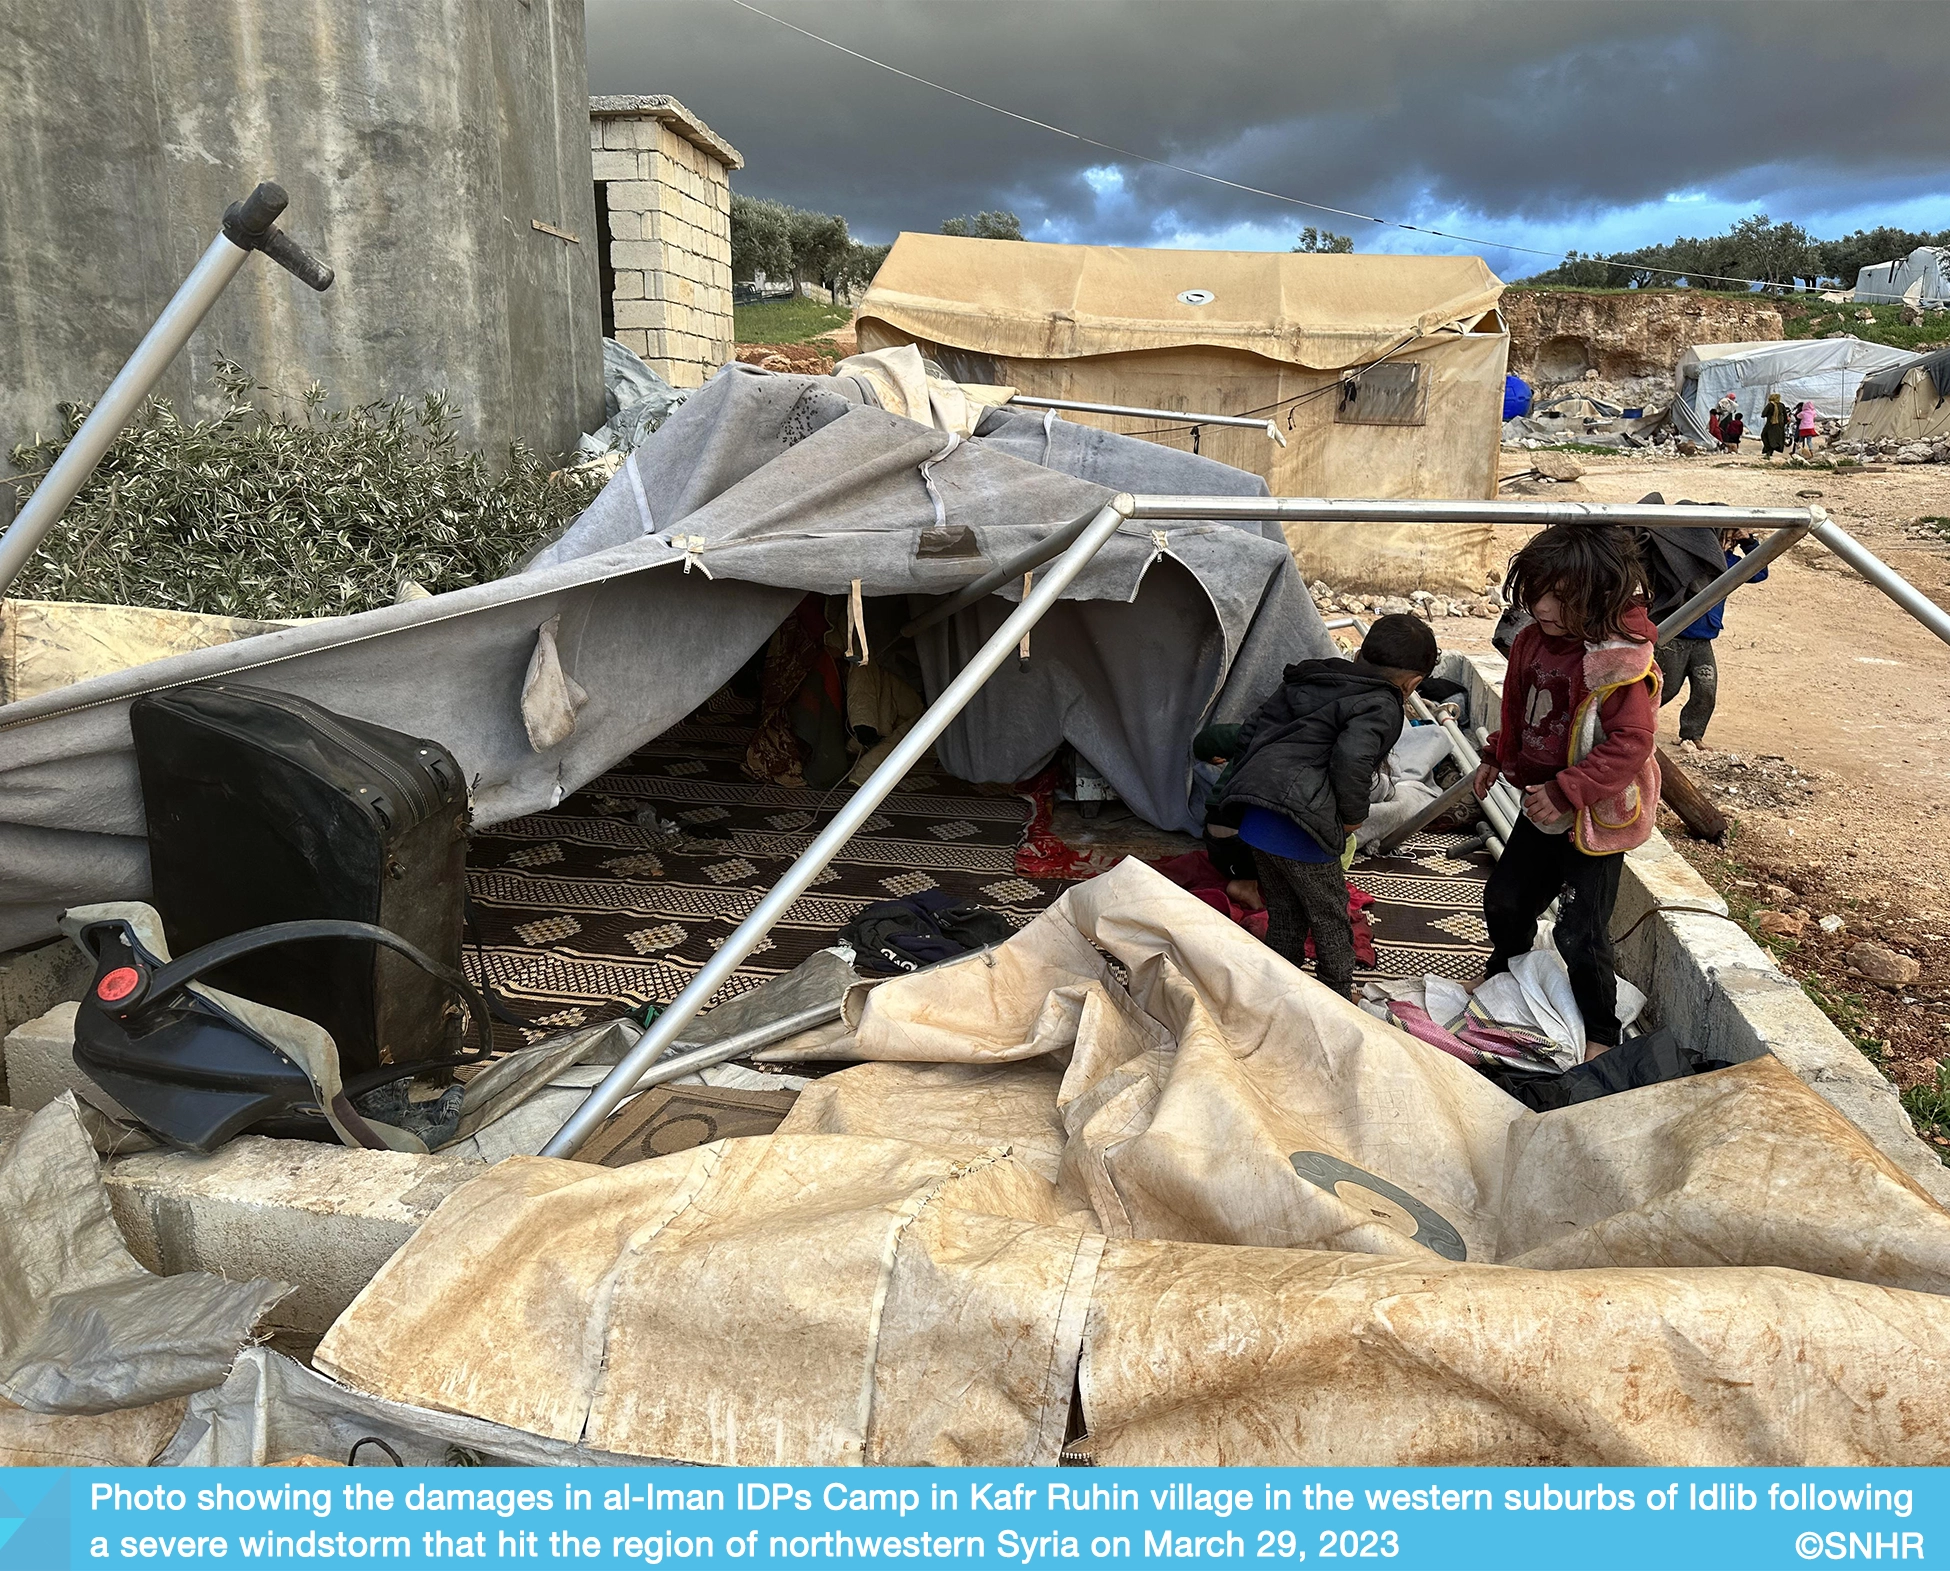 Tens of thousands of residents affected by severe windstorm that hit IDPs camps housing earthquake victims in northern Syria, March 29, 2023